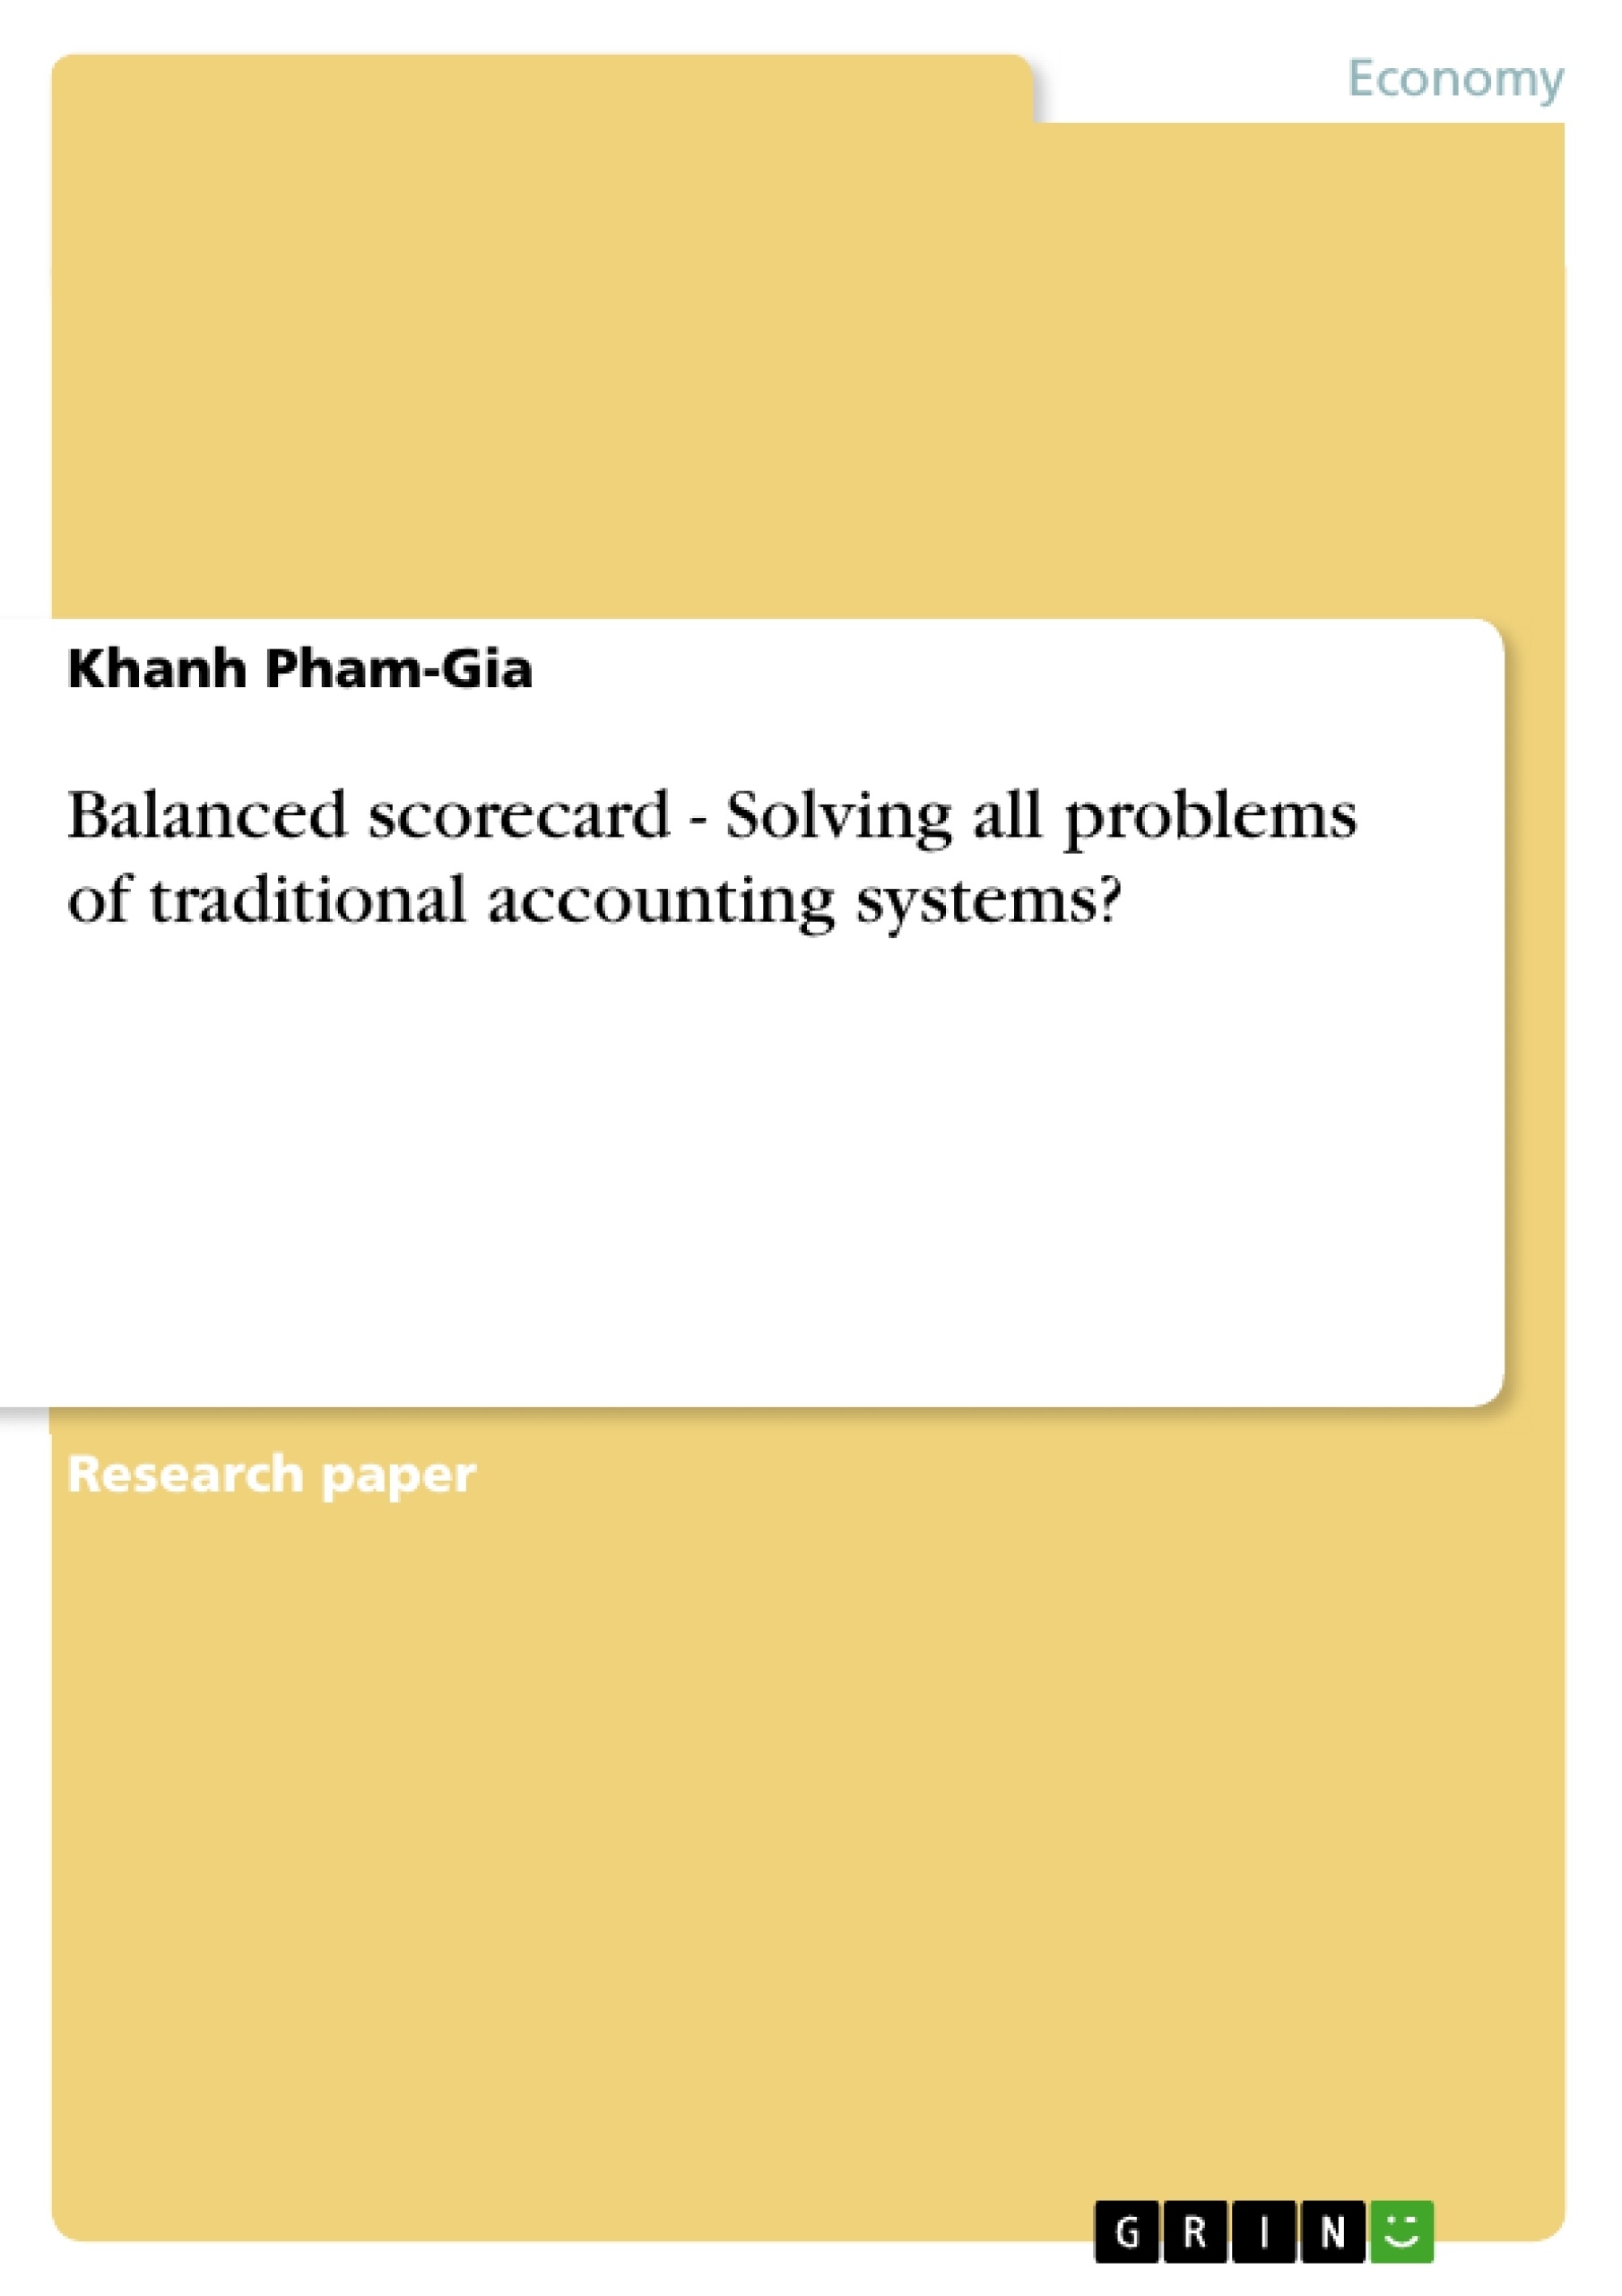 Title: Balanced scorecard - Solving all problems of traditional accounting systems?